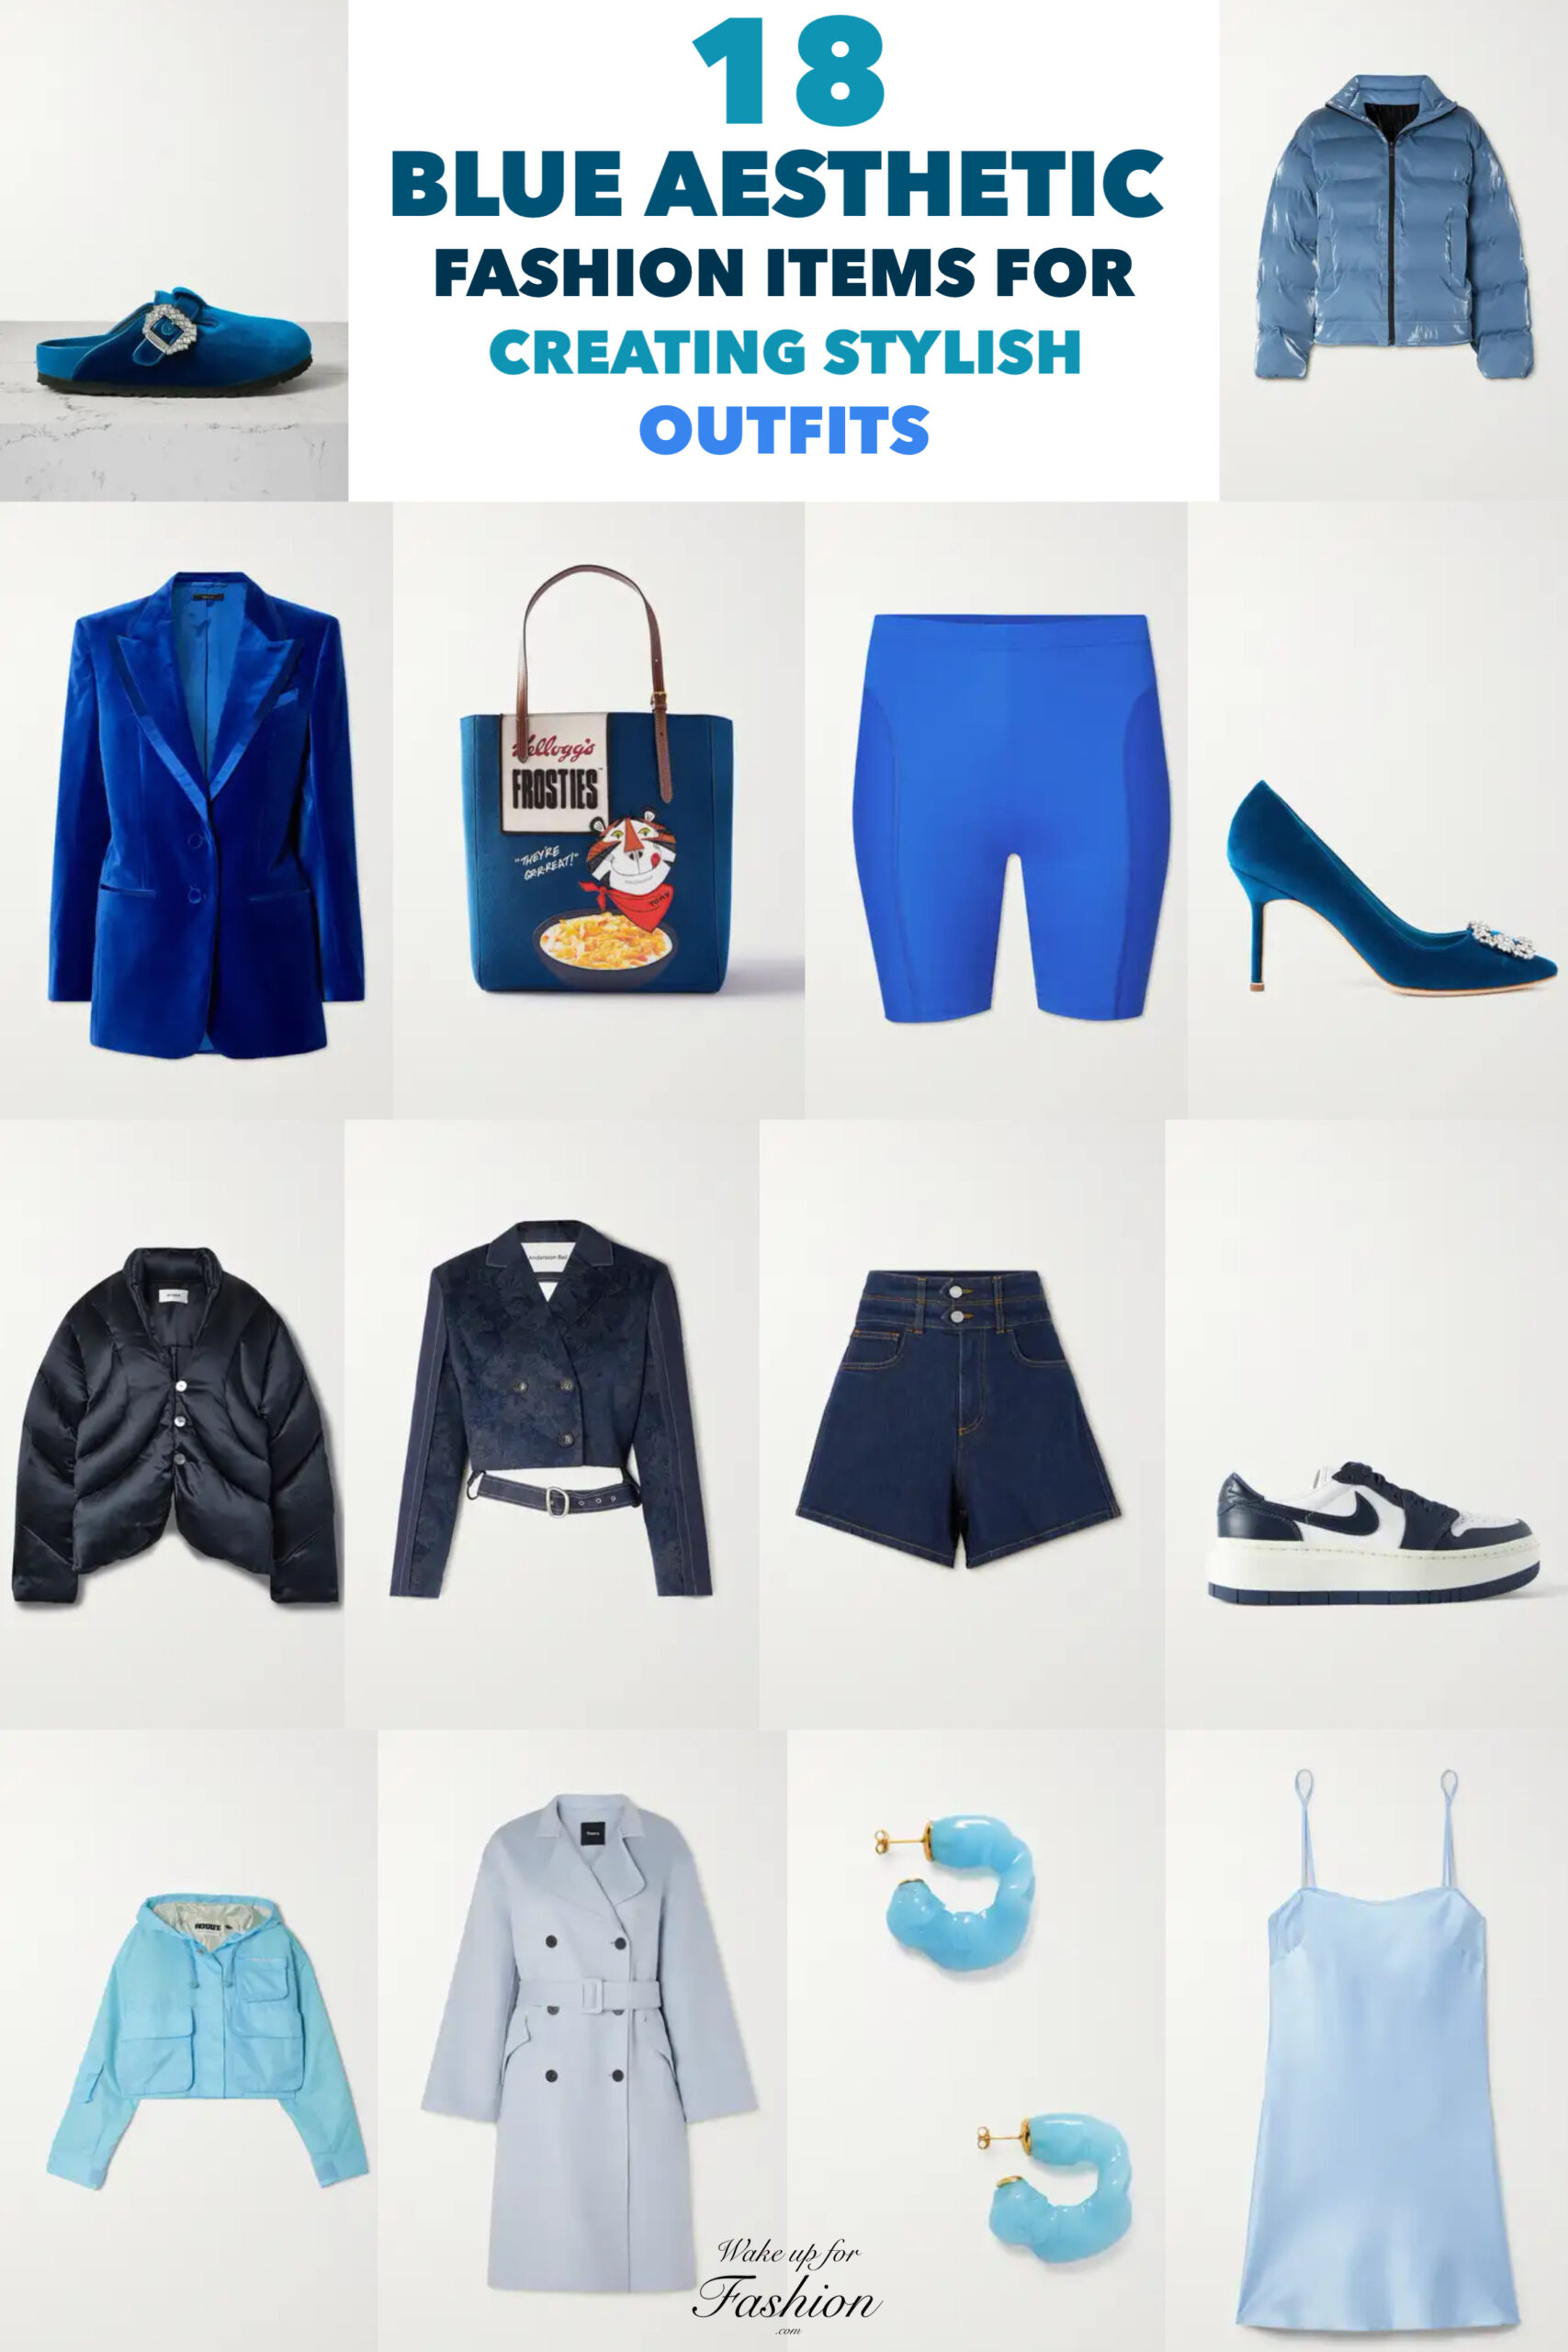 Y2K Aesthetic: Clothing Guide For Creating Outfits - Wake Up For